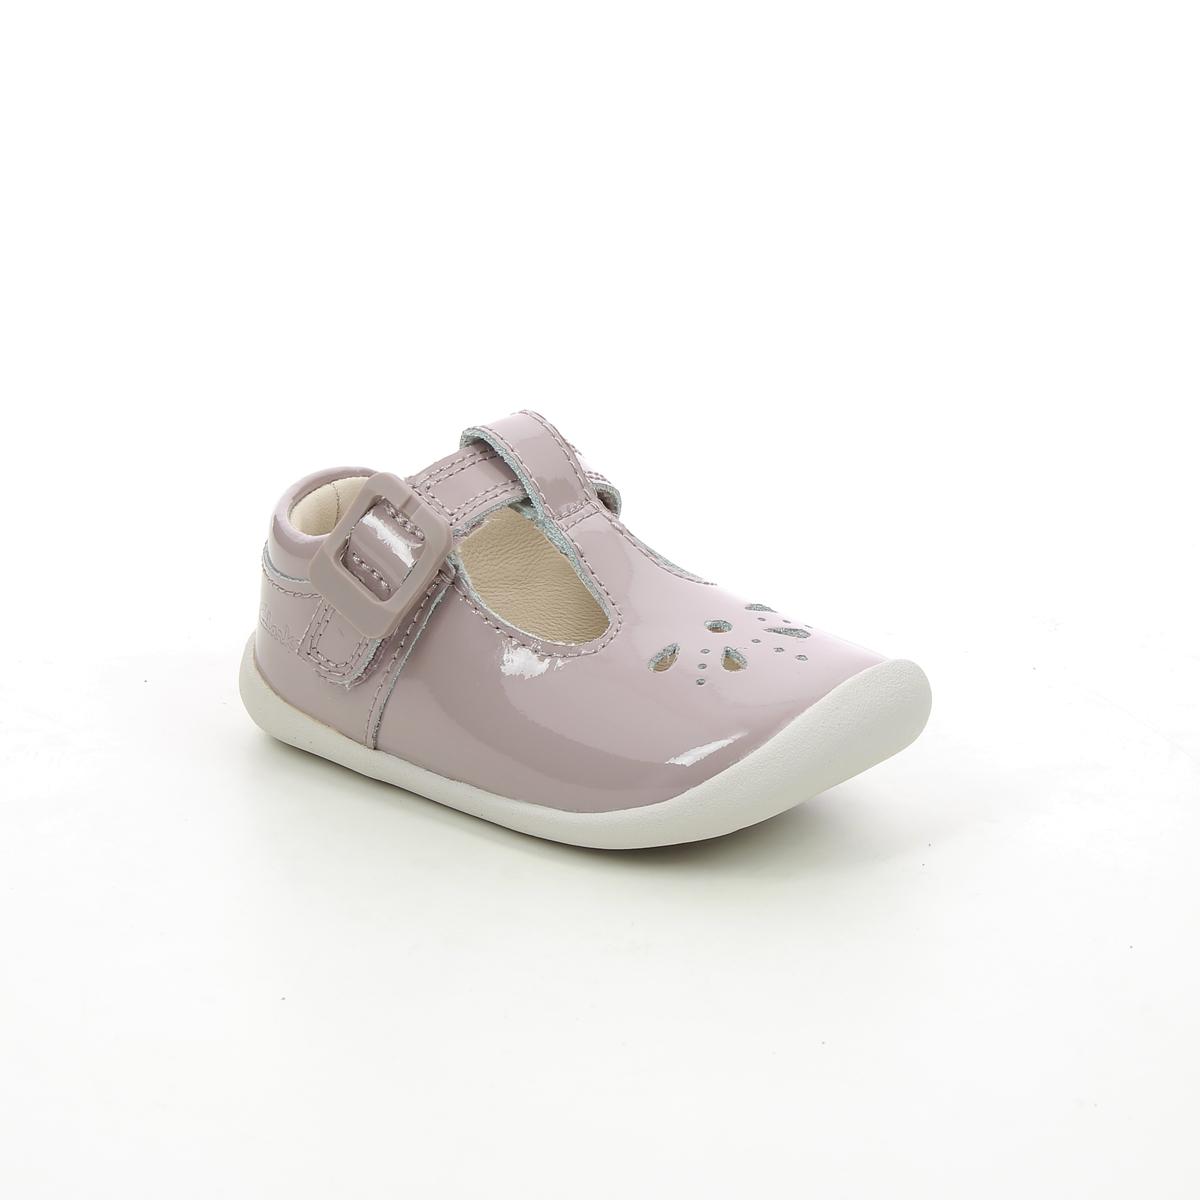 Clarks Roamer Star T H Fit Pink girls first and baby shoes